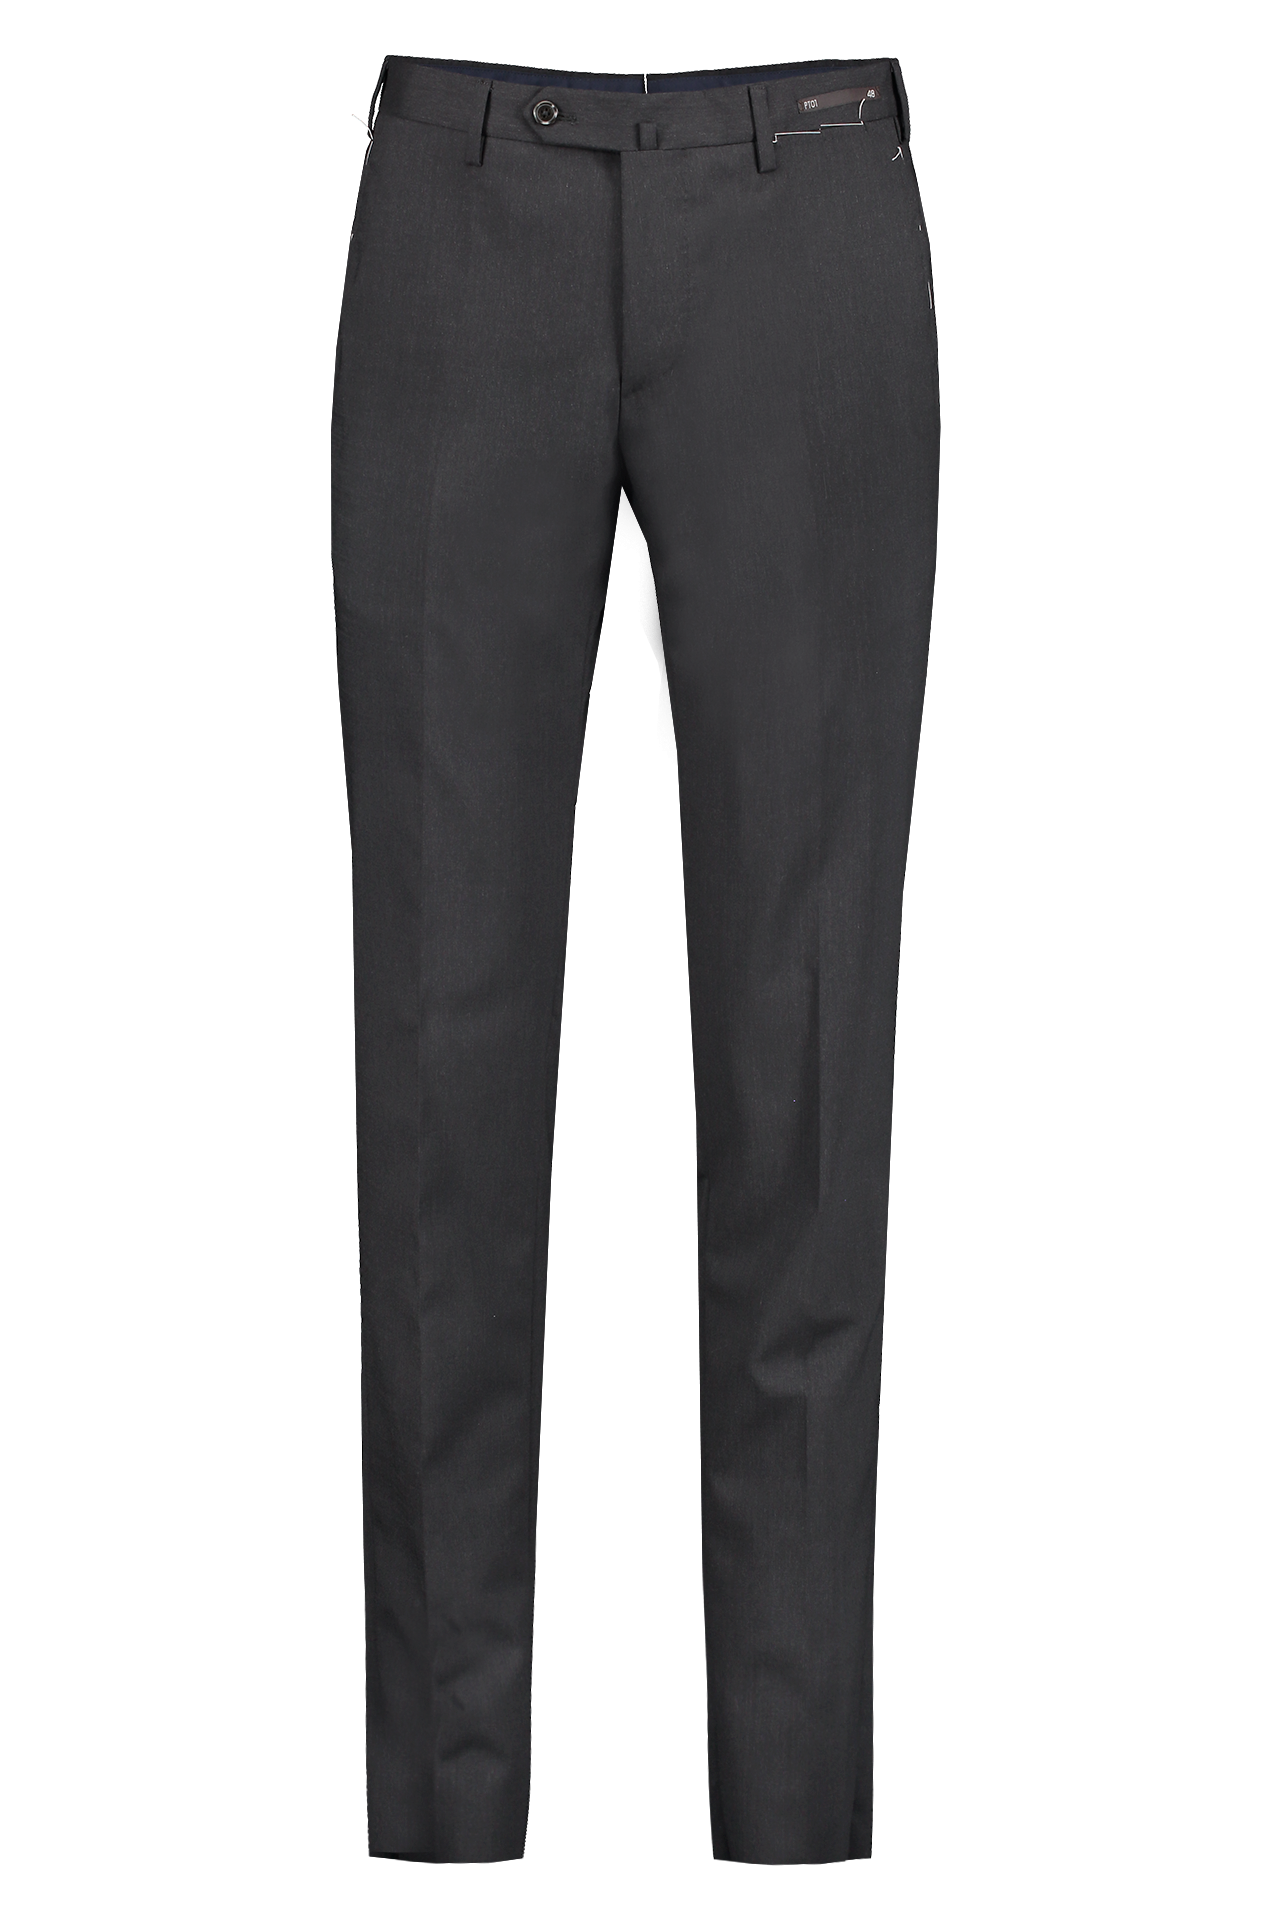 PT Wool Trouser Dark Charcoal Front Mannequin Image (600670404619)